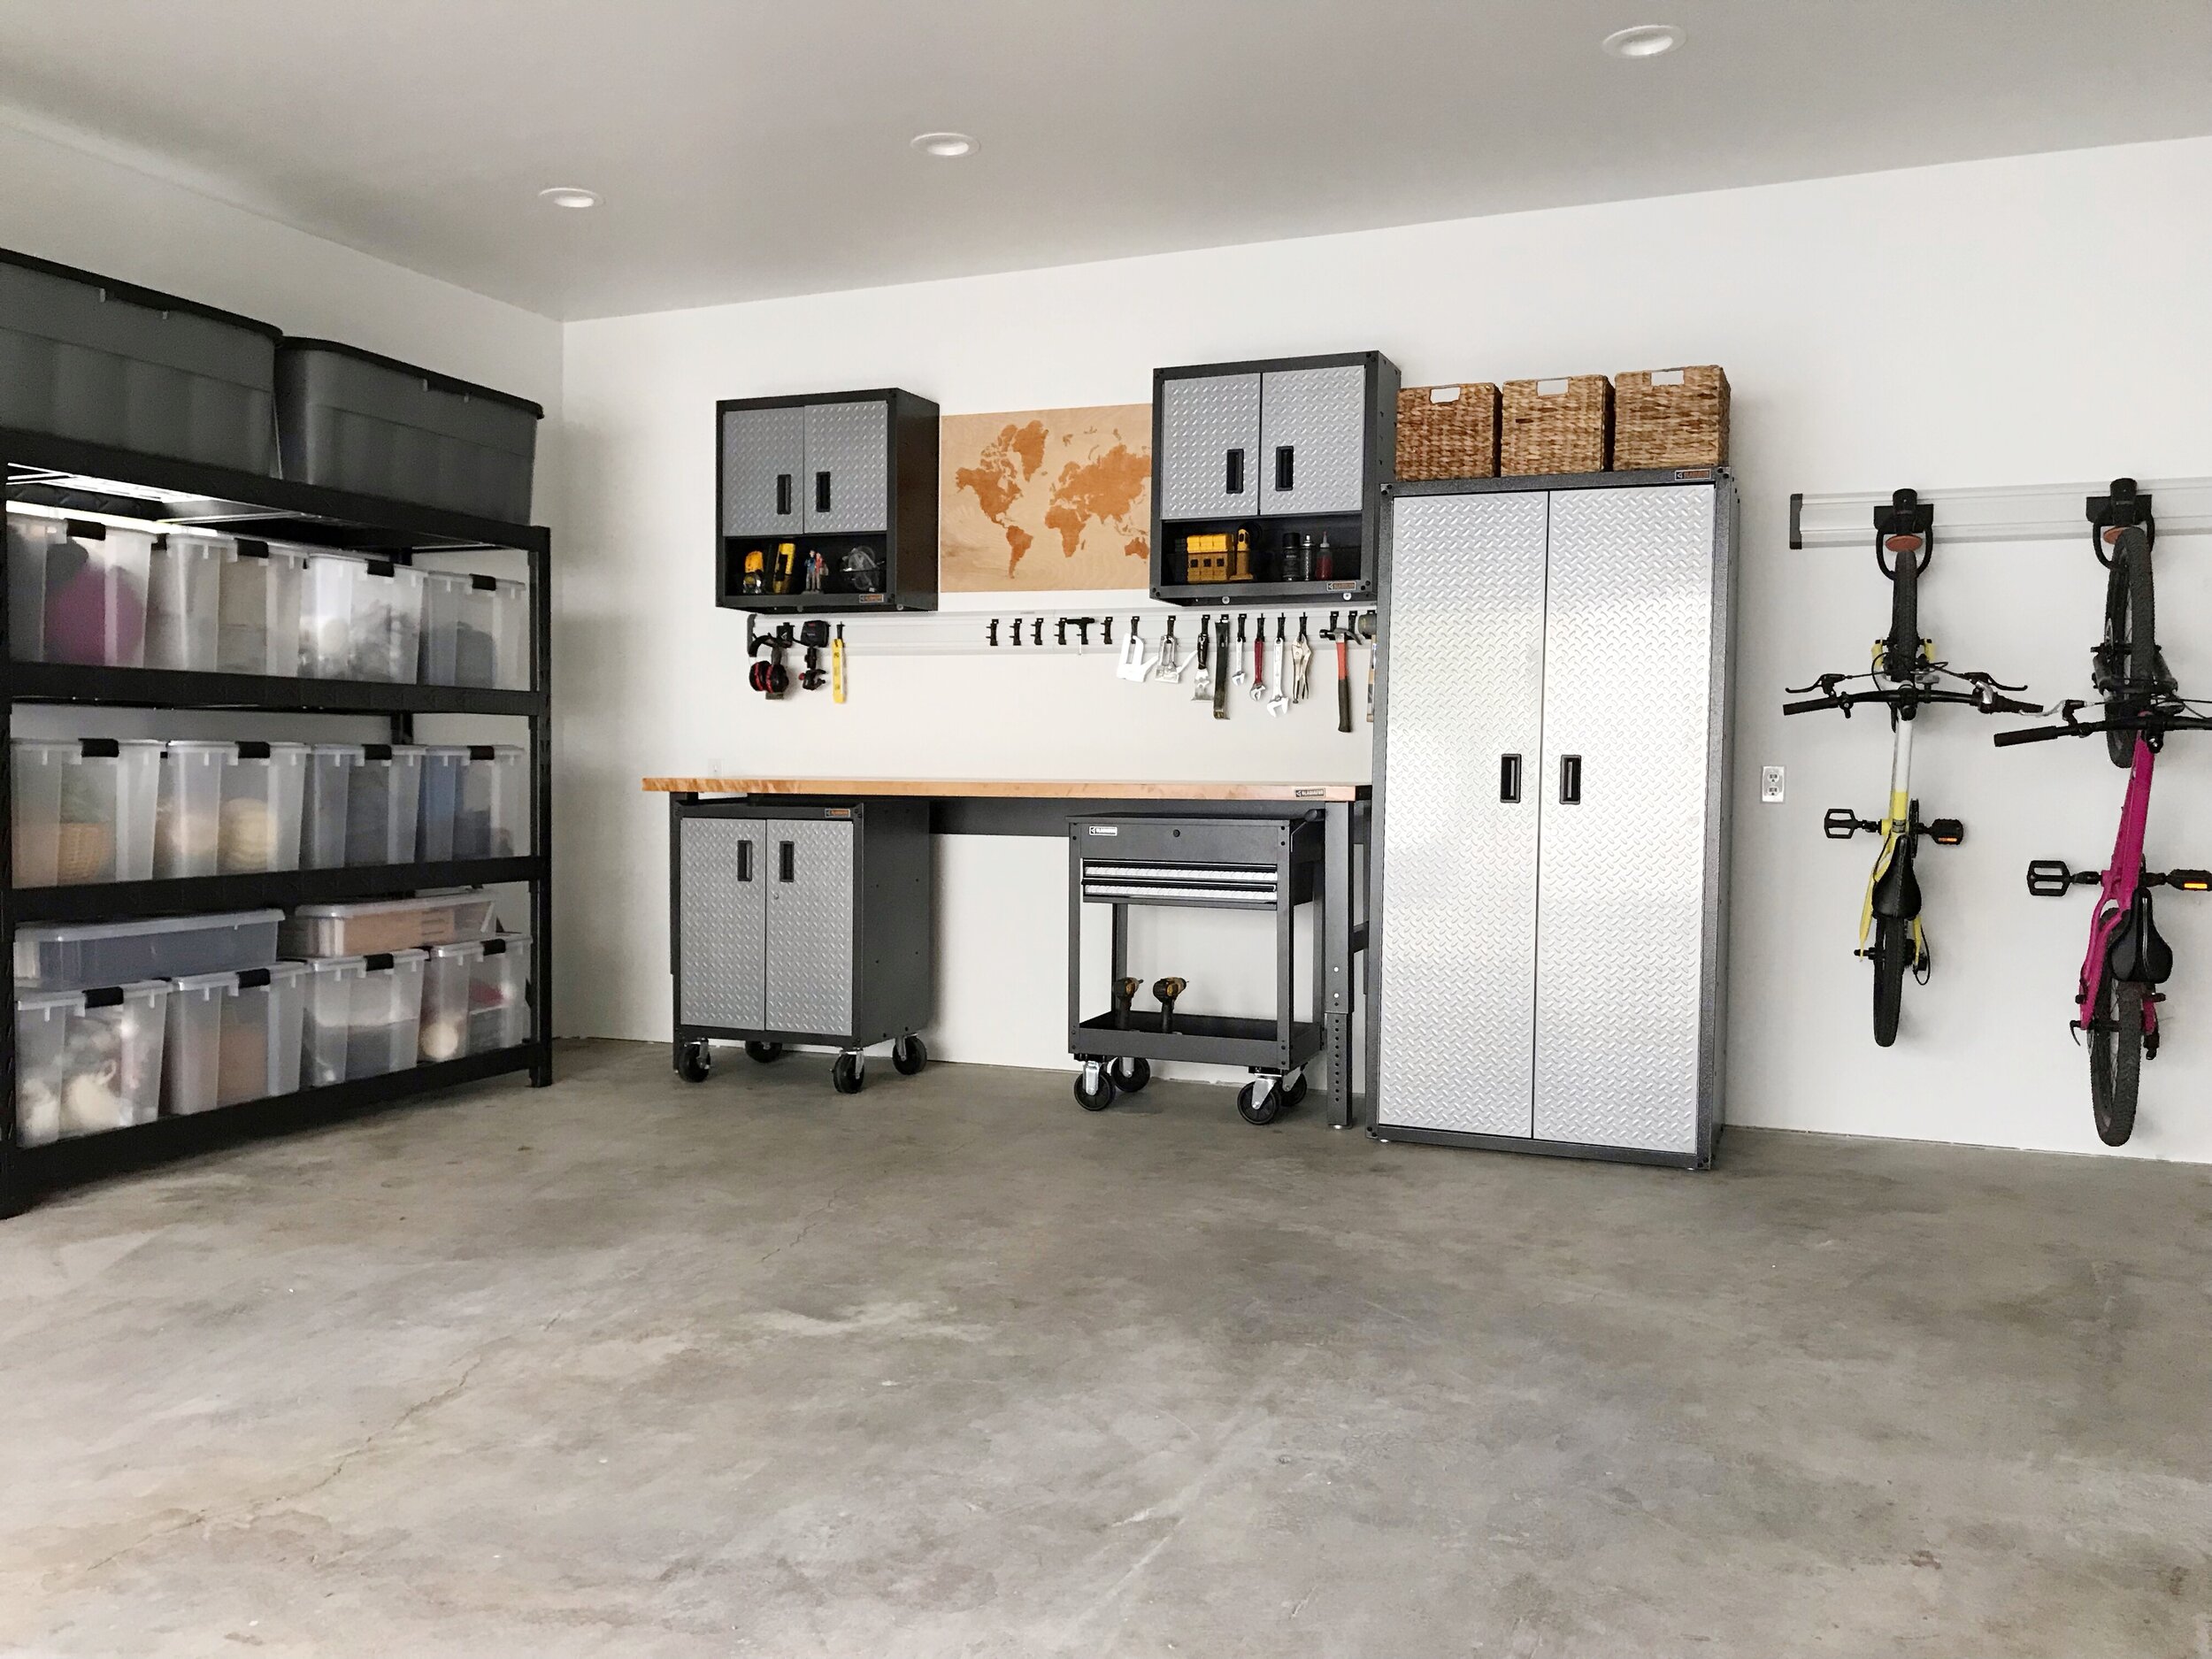 Garage Organization 101: Your Step by Step Guide — The Orderly Space